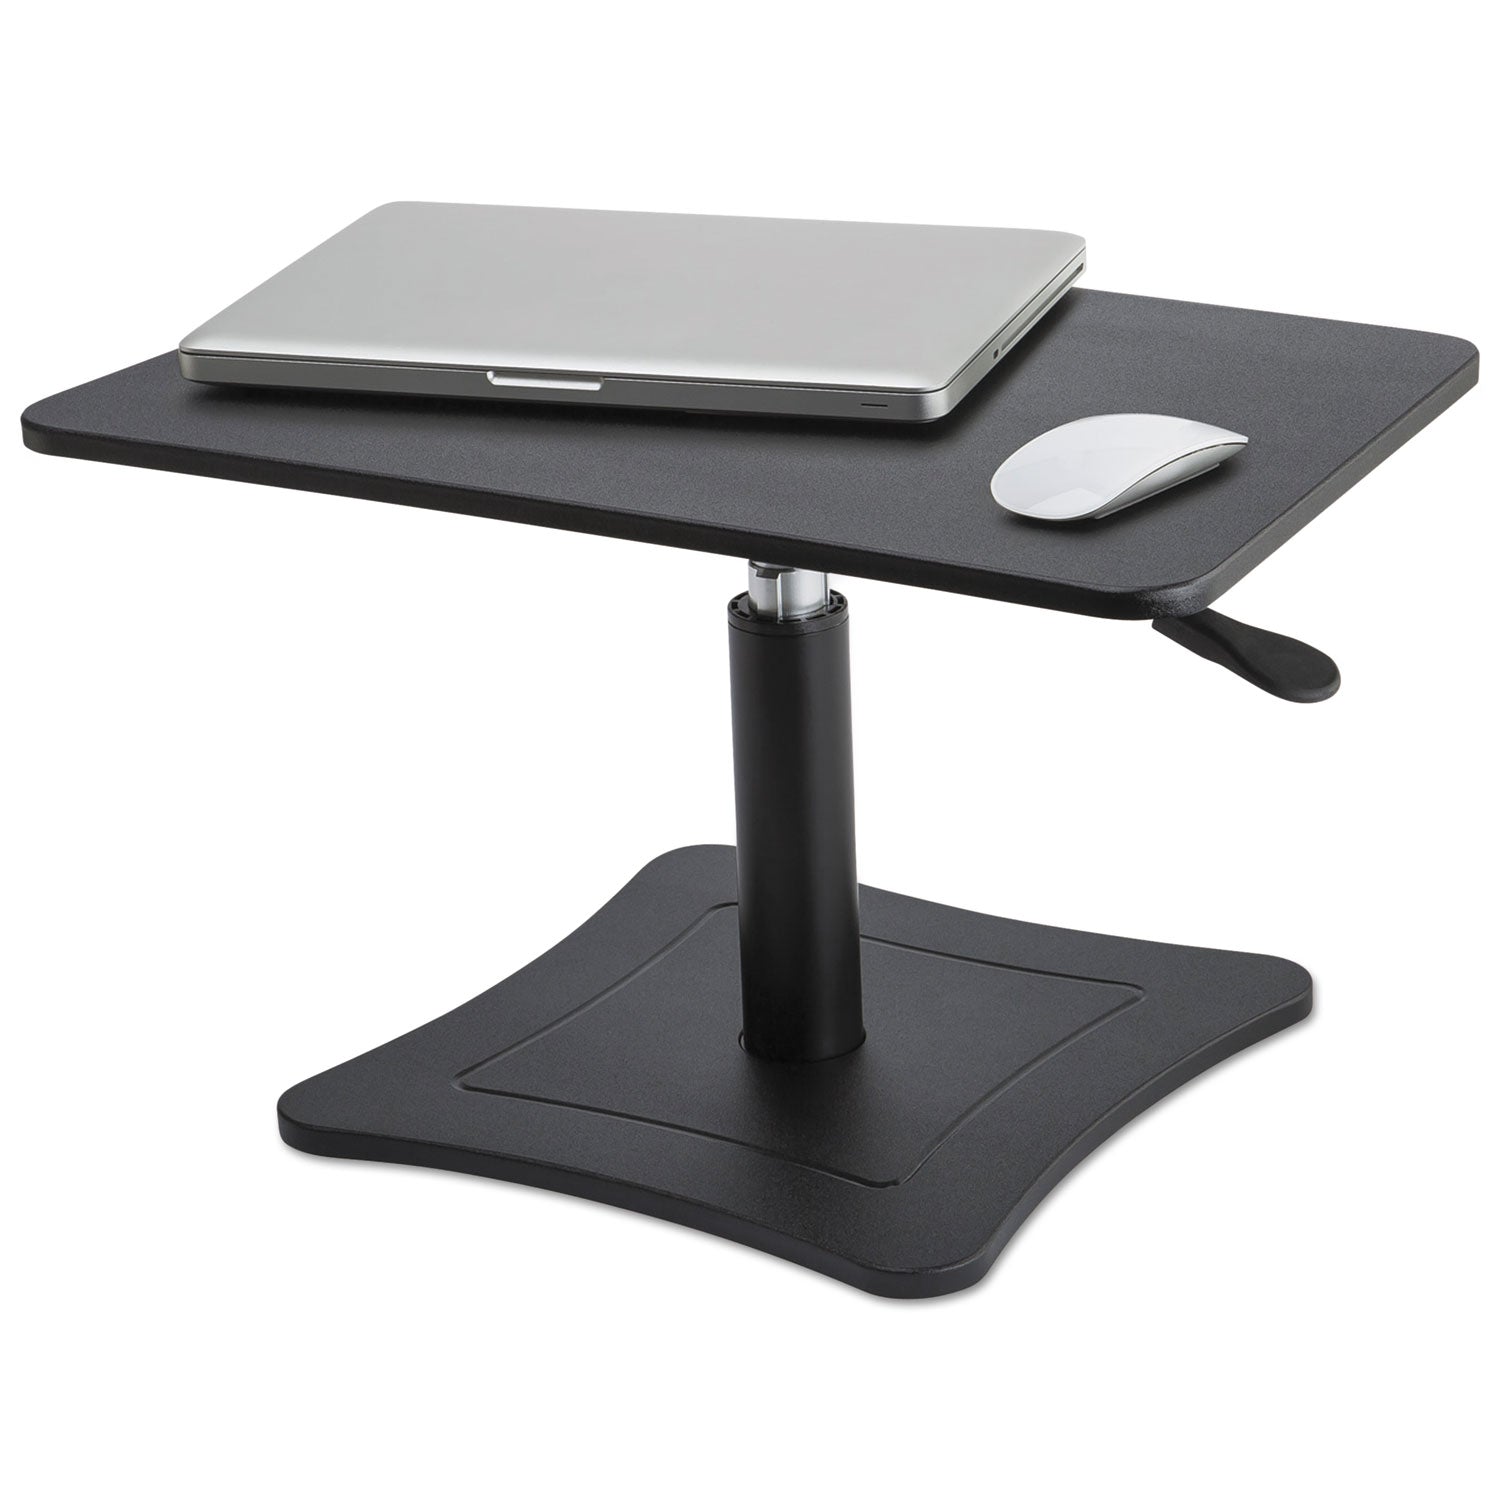 dc230-adjustable-laptop-stand-21-x-13-x-12-to-1575-black-supports-20-lbs_vctdc230b - 1